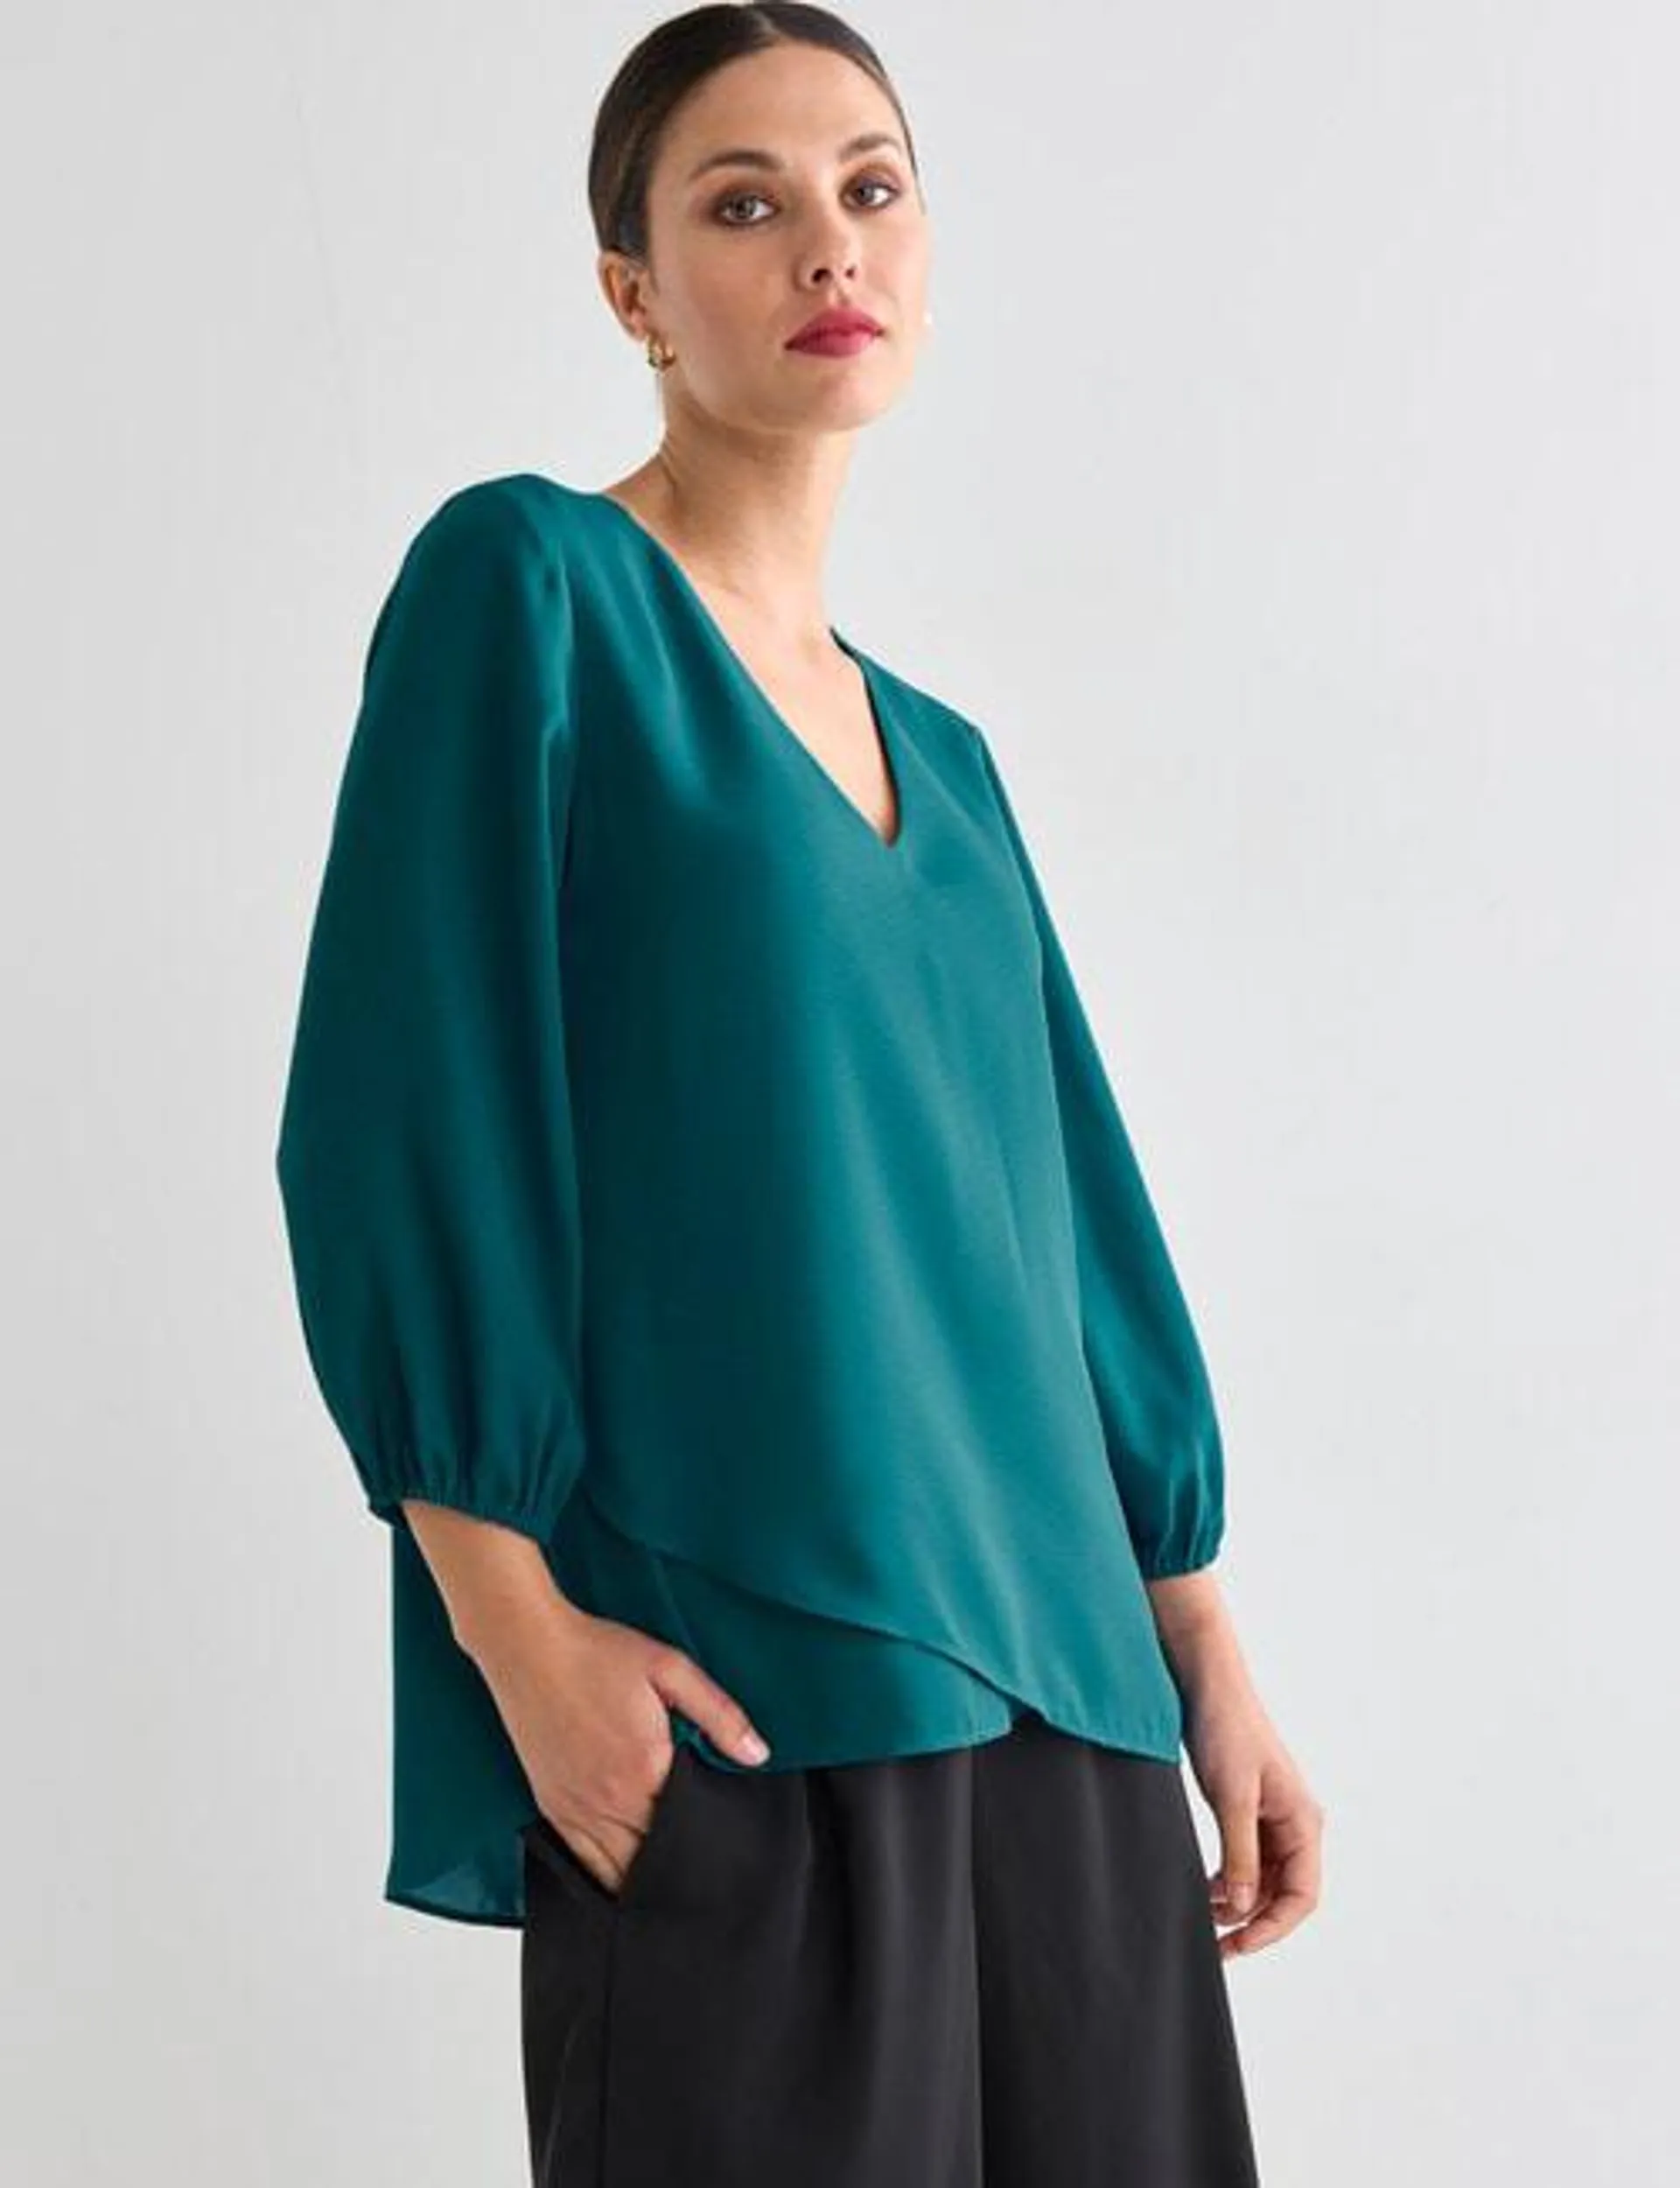 Whistle Neck Layer Top, Peacock